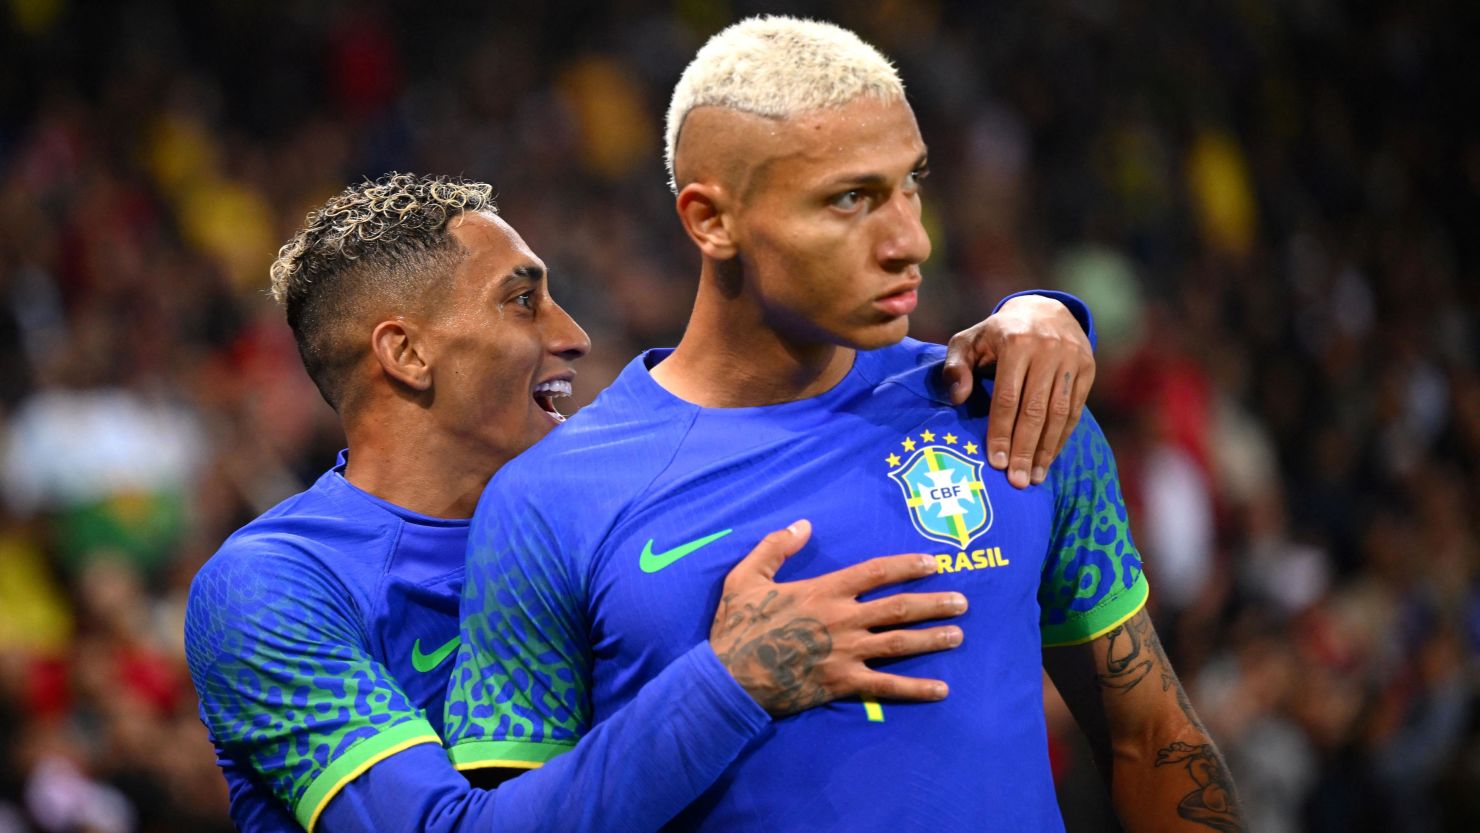 Richarlison's goal put Brazil back into the lead after Tunisia had equalized.